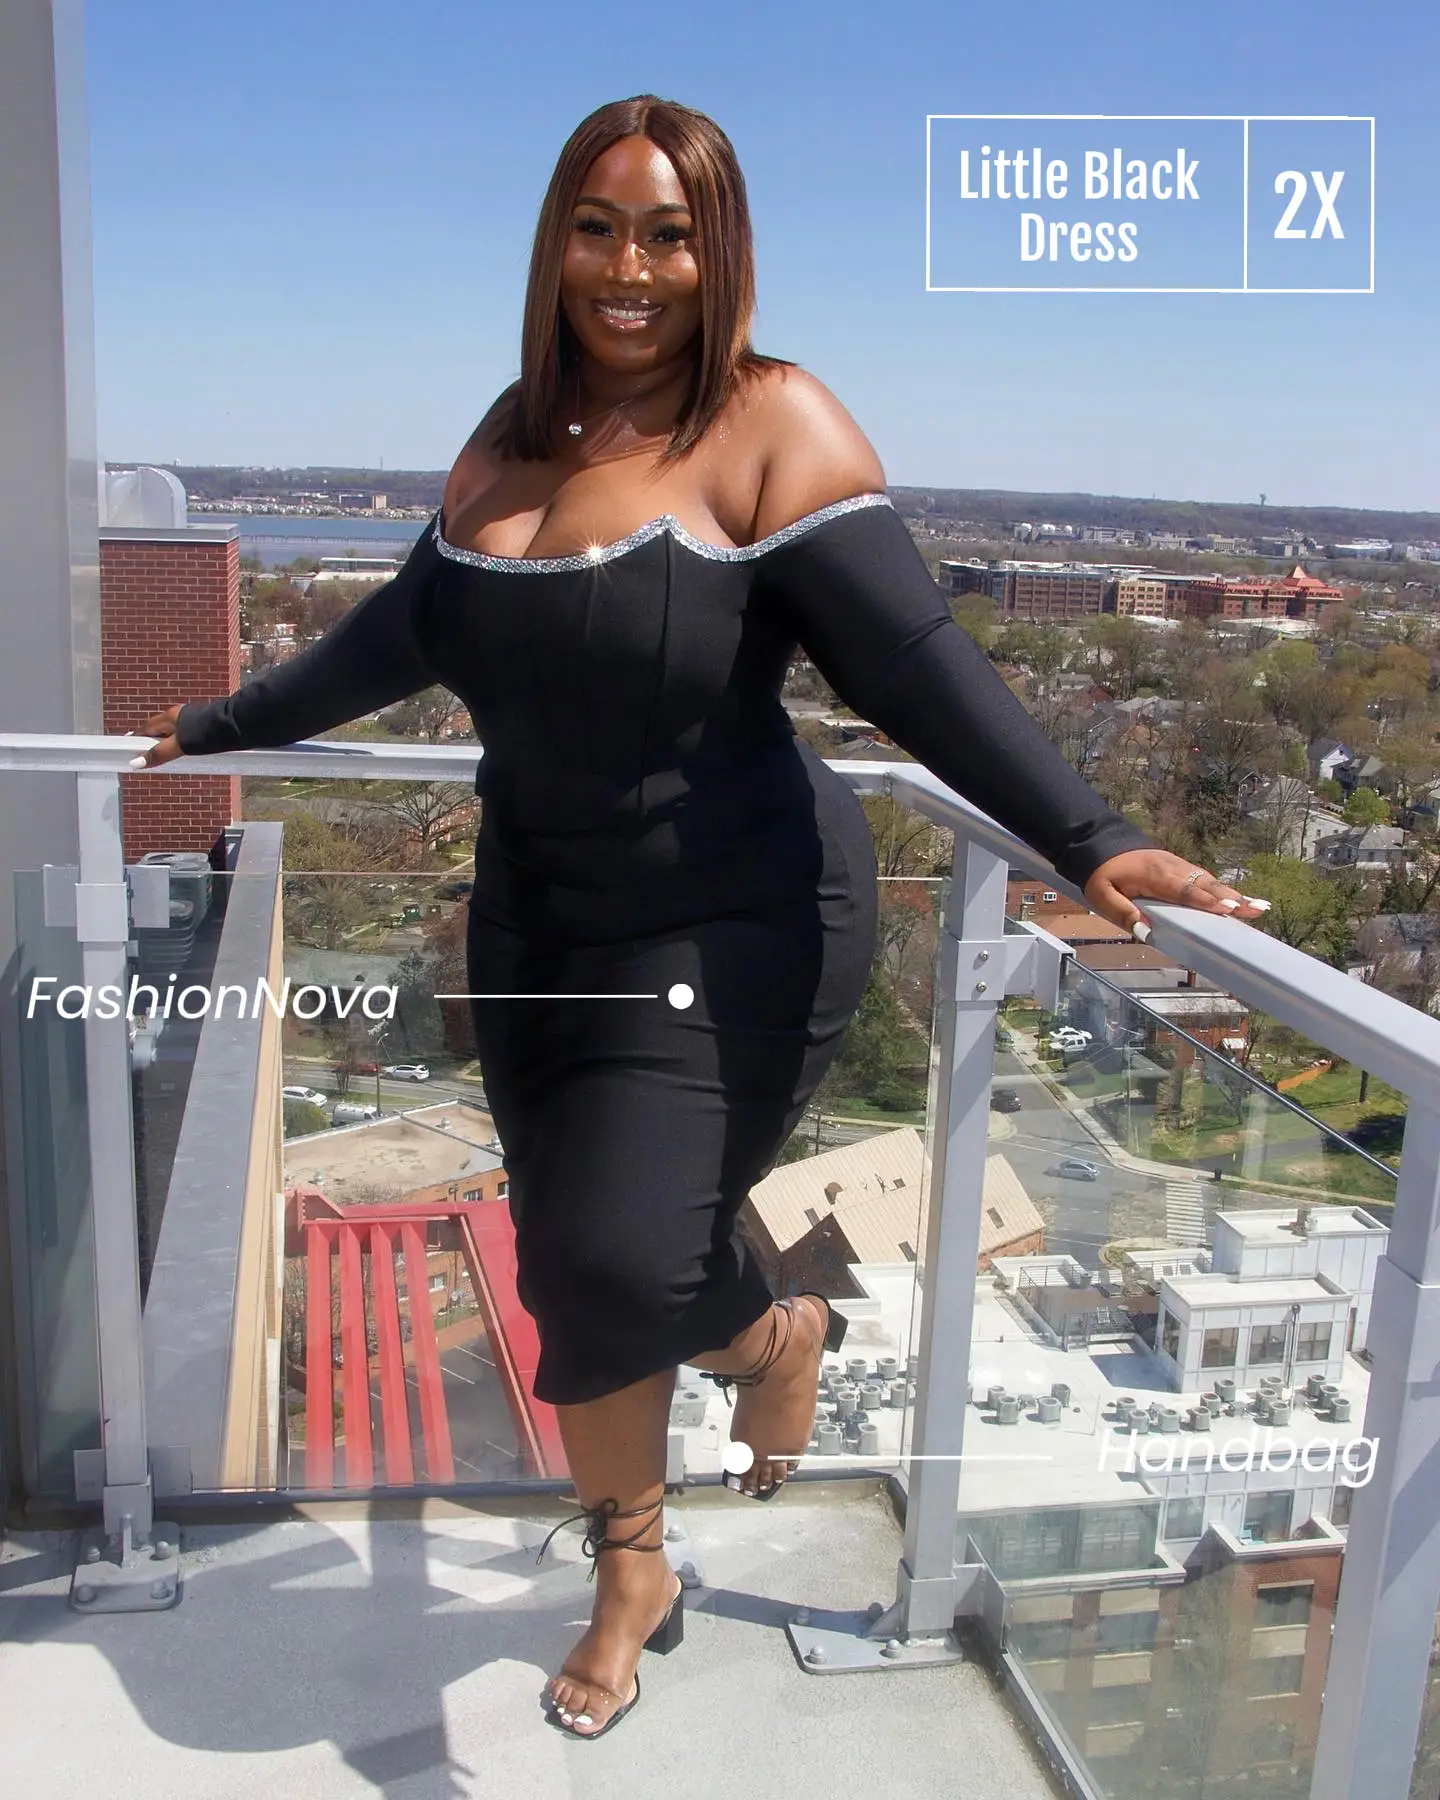 I'm plus-size and wear see-through Fashion Nova dresses, my belly